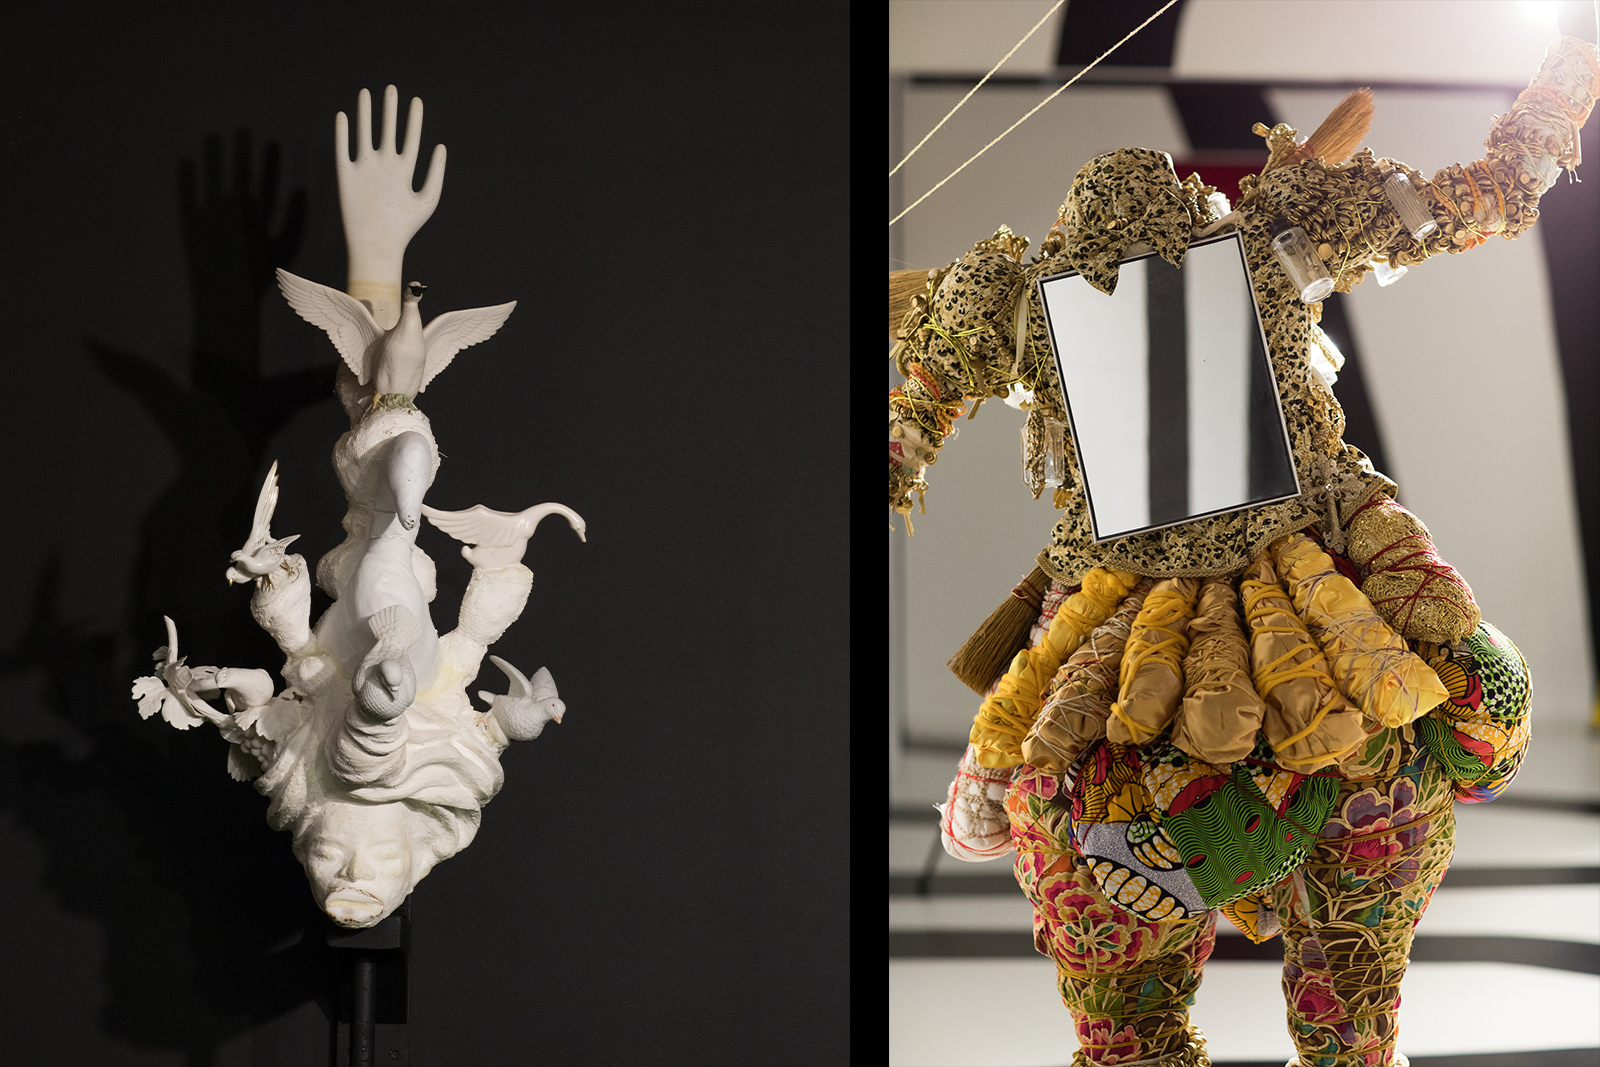 Vanessa German - White head sculpture against a black wall (birds and an out stretched hand extend from the head). Second image is the back side of an life-size sculptural figure, made with bright, tightly-woven fabric and a gilded mirror on the back.